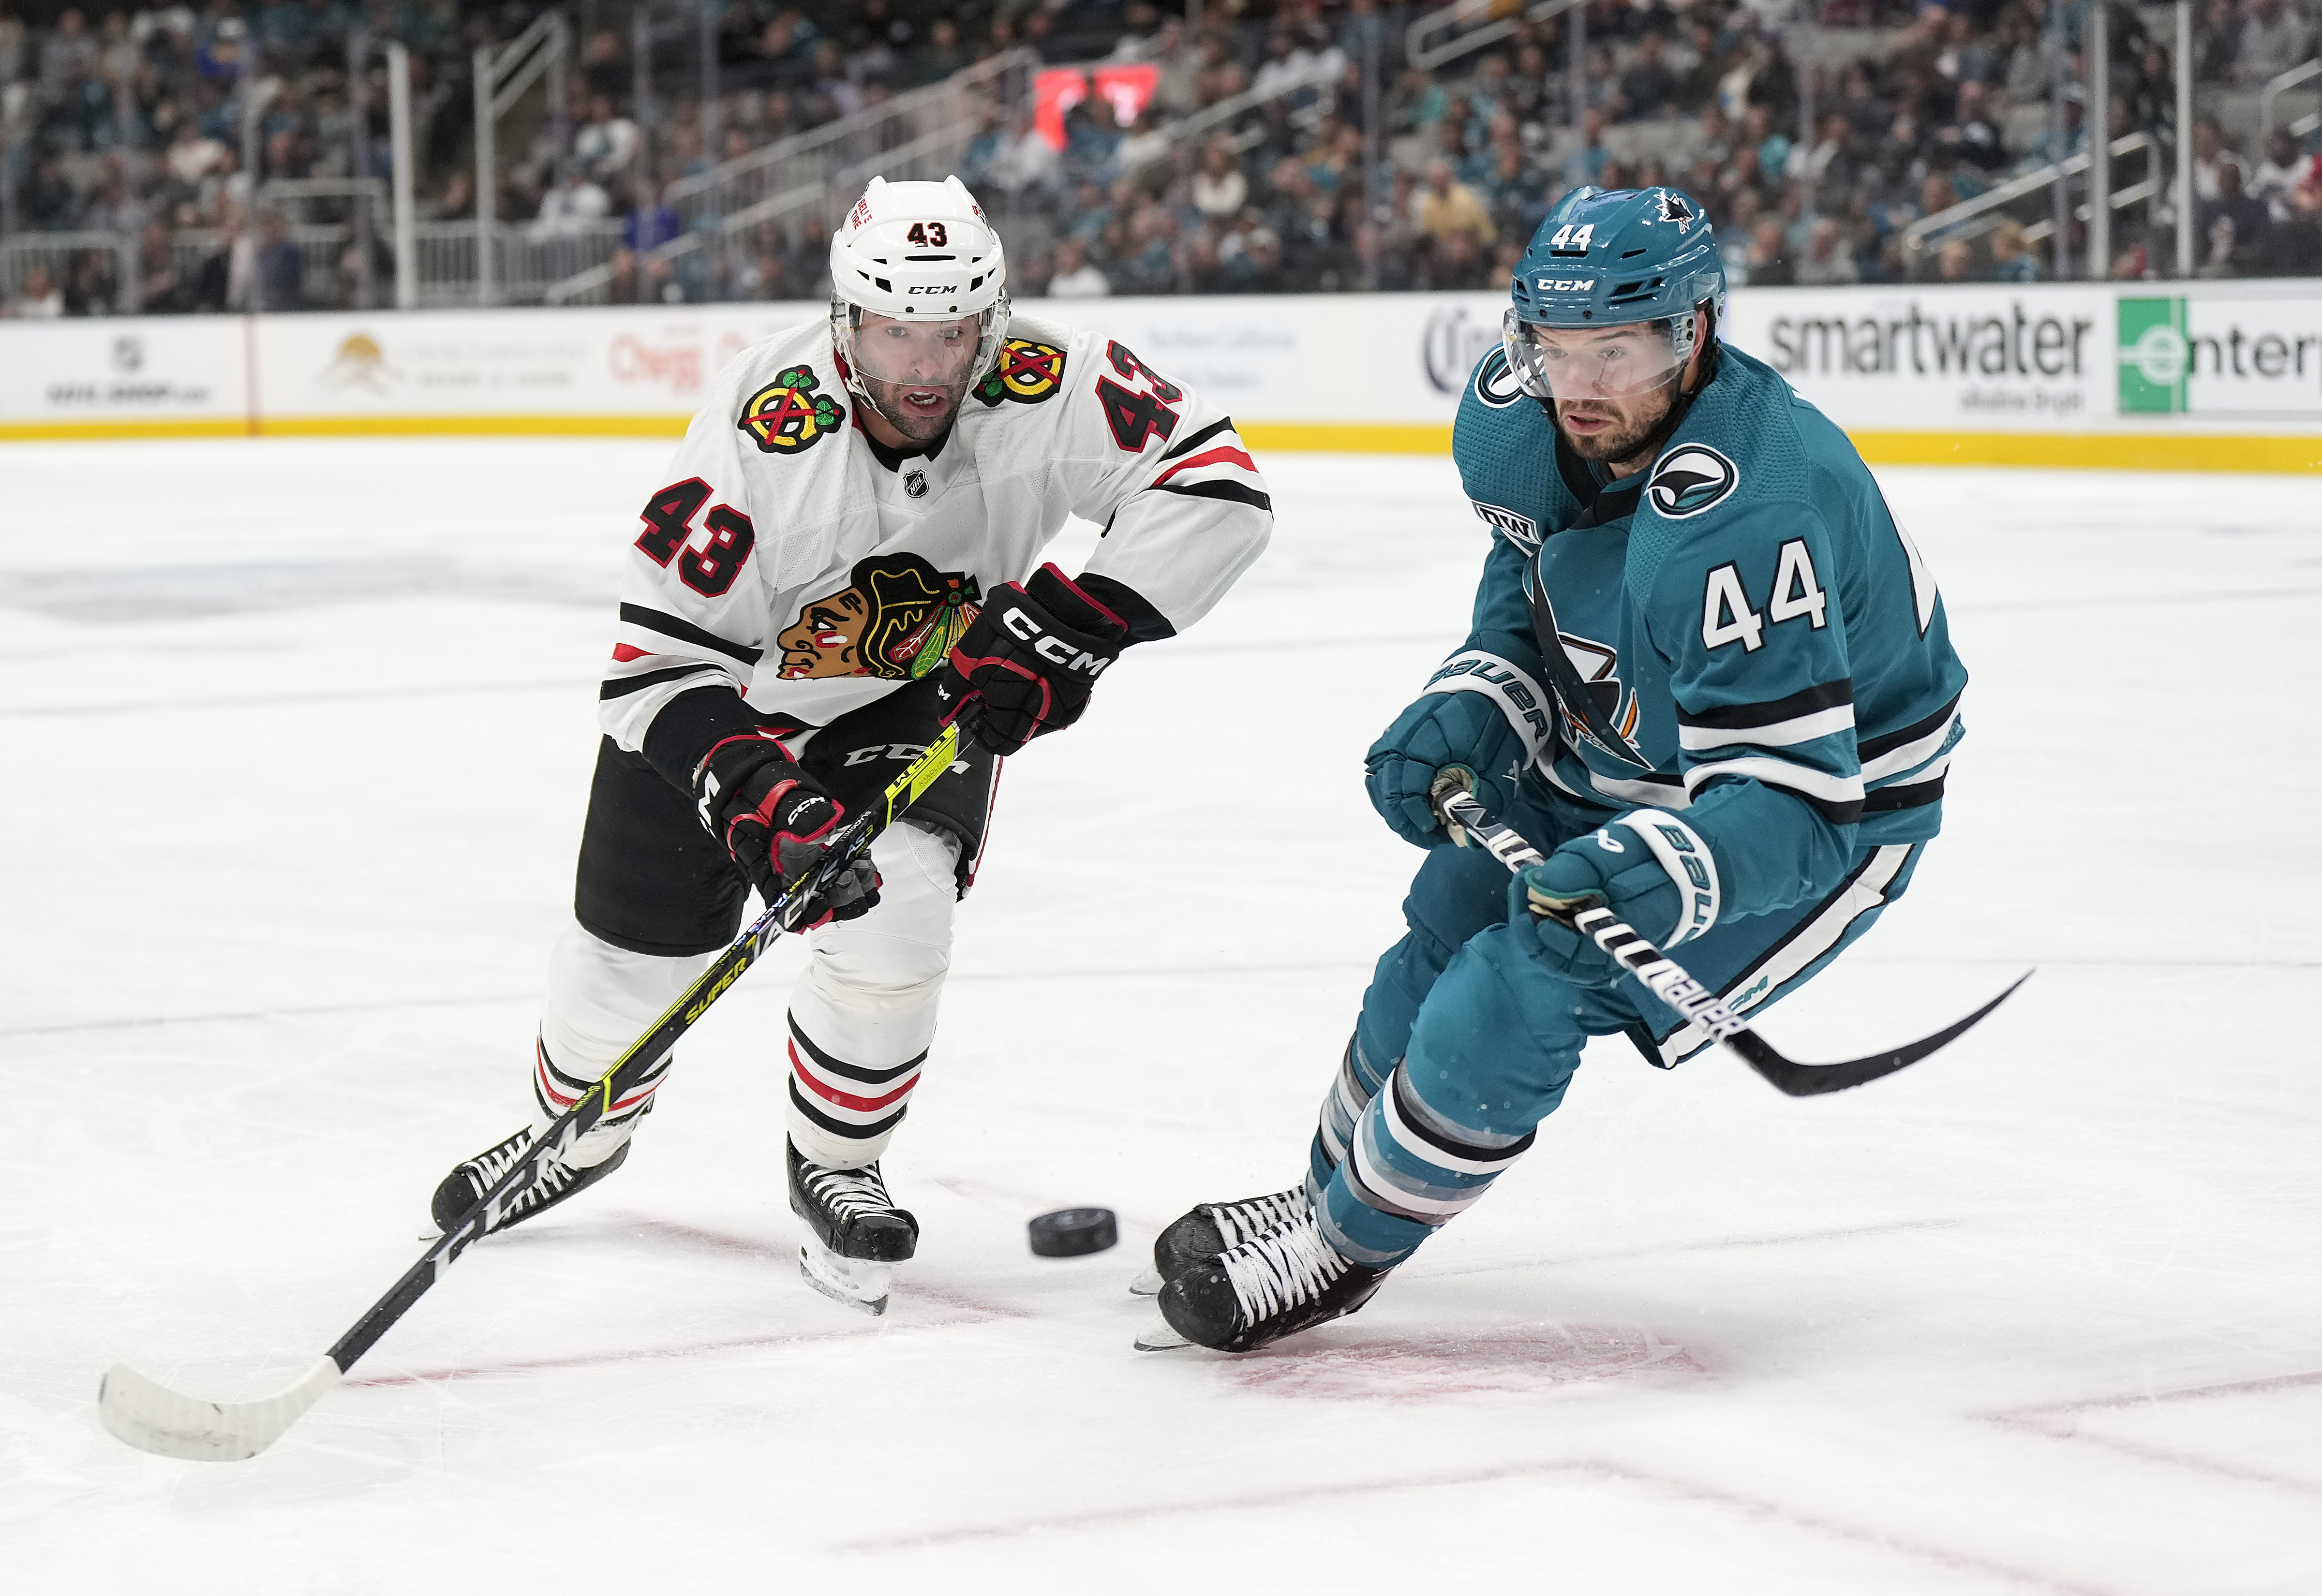 Colin Blackwell #43 of the Chicago Blackhawks and Marc-Edouard Vlasic #44 of the San Jose Sharks races to gain control of the puck during the first period of an NHL Hockey game at SAP Center on October 15, 2022 in San Jose, California.